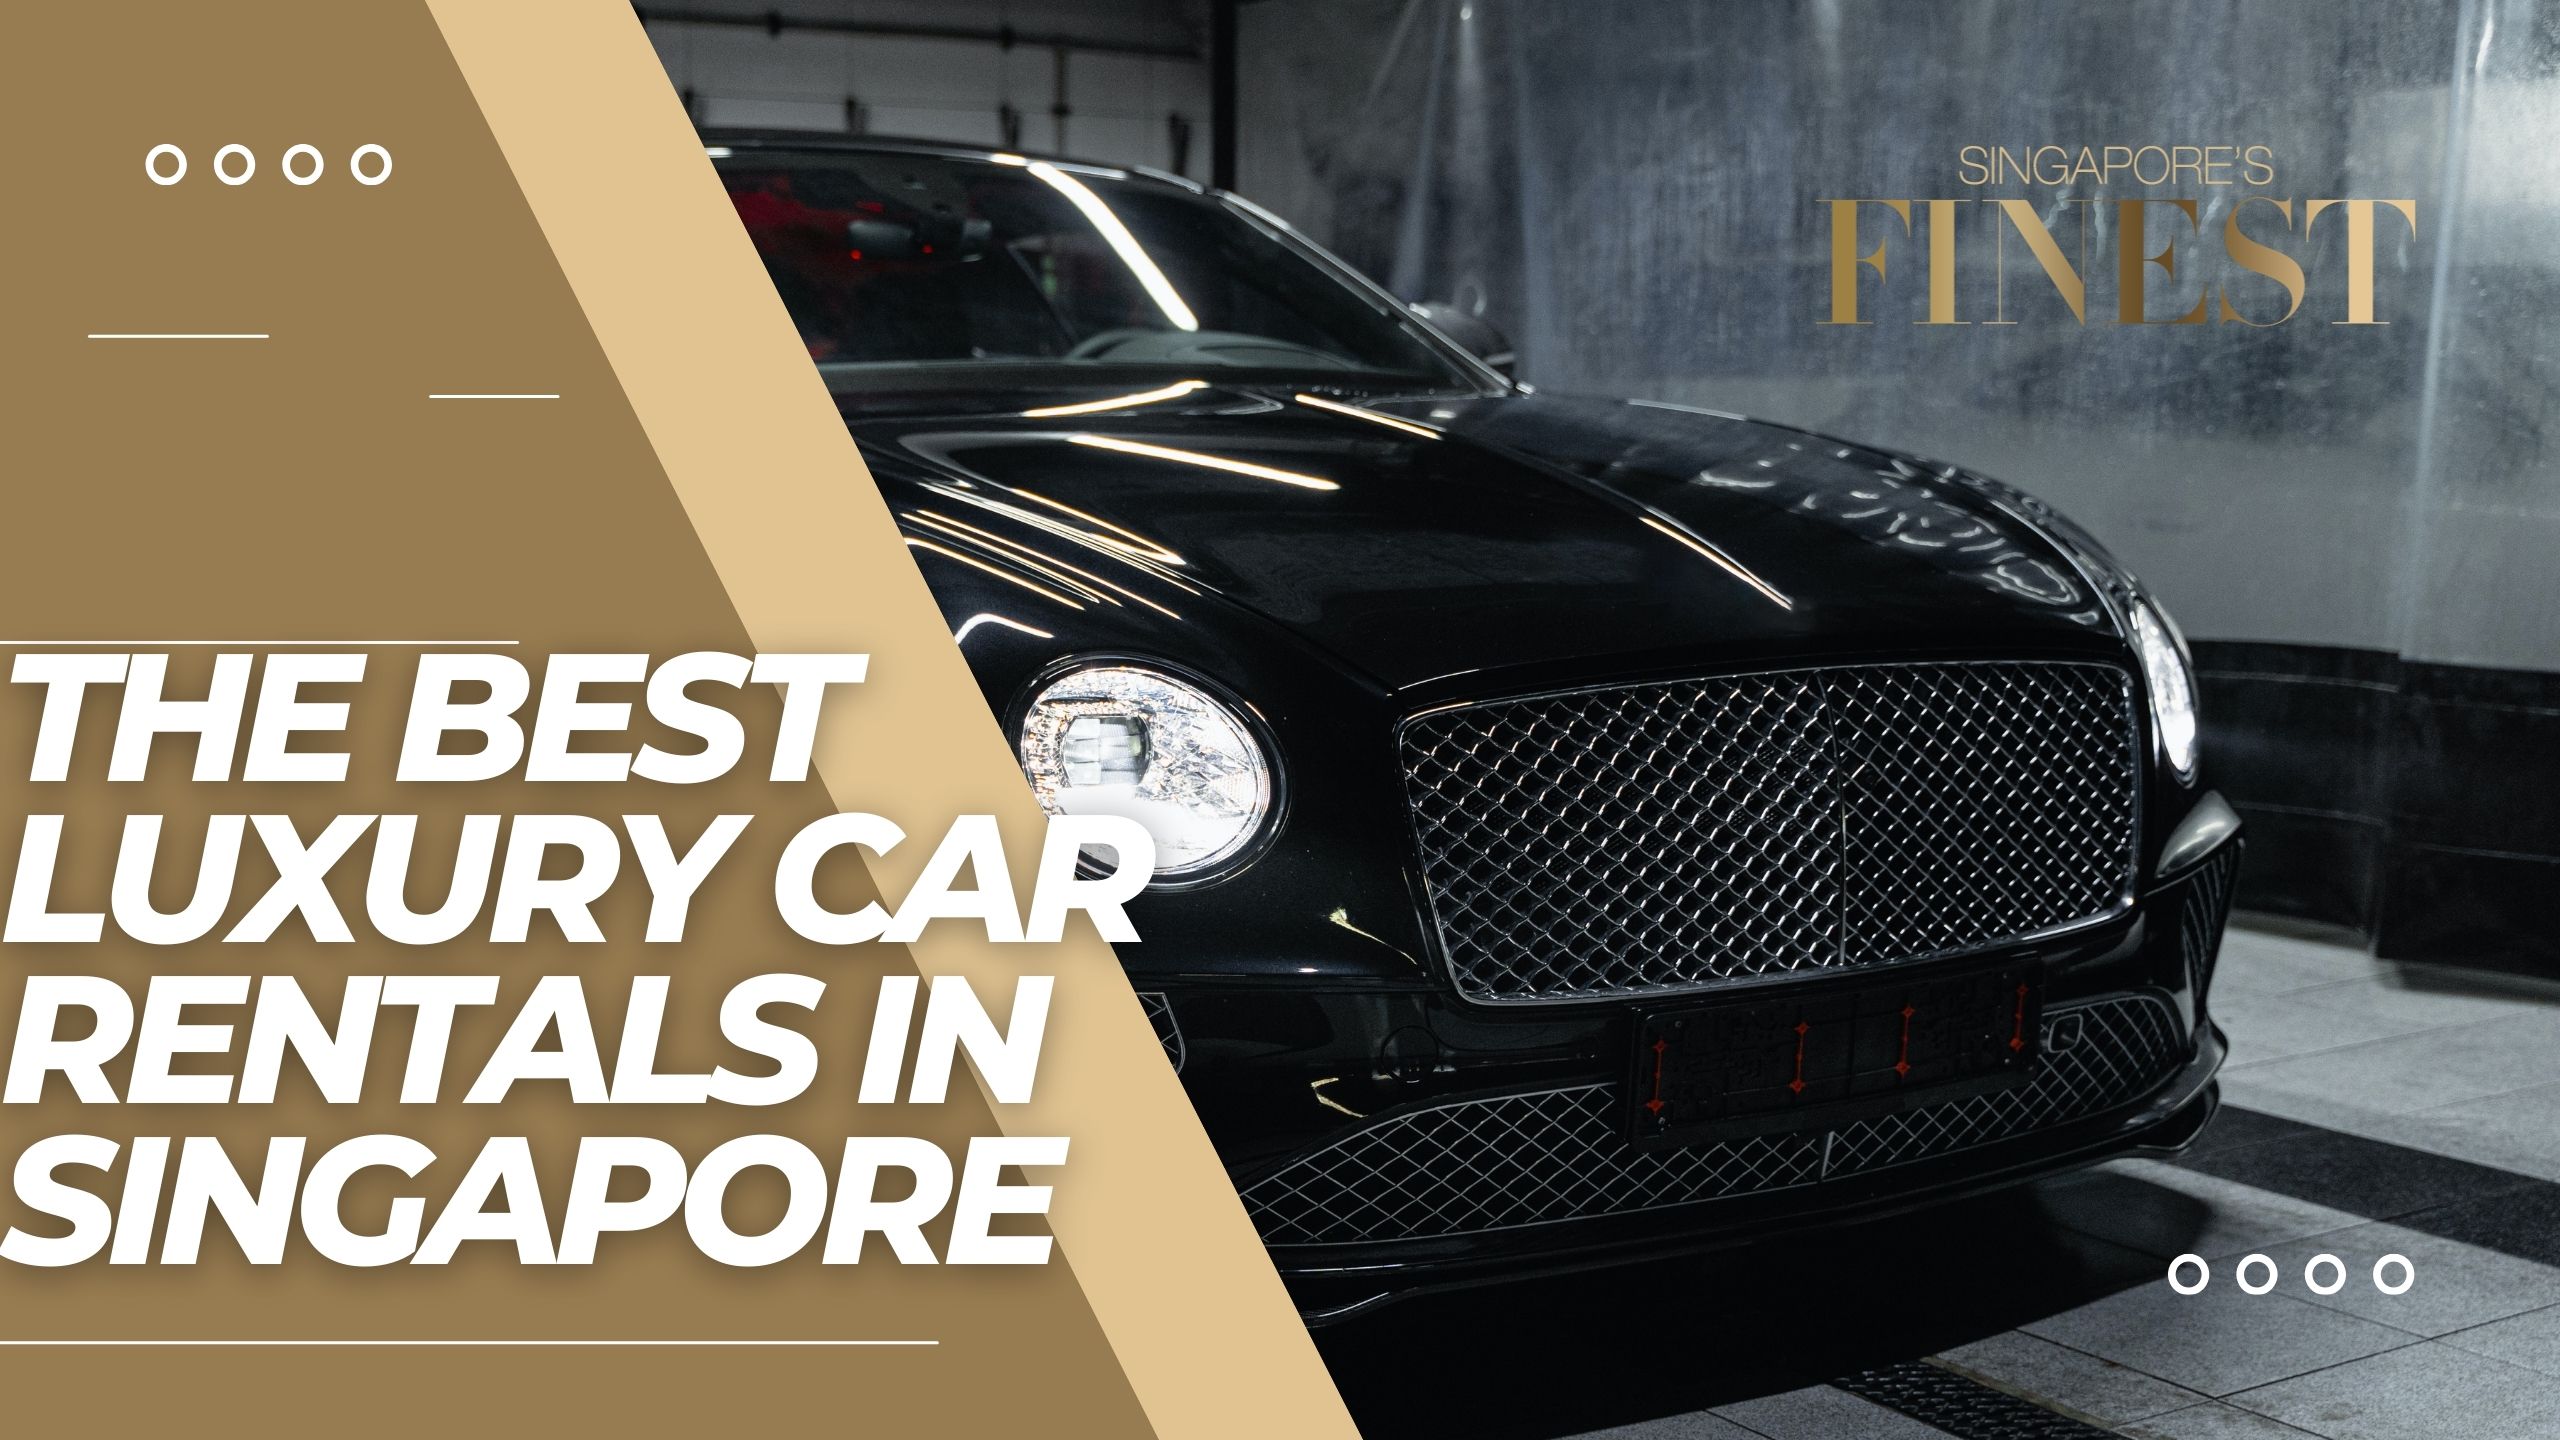 The Finest Luxury Car Rentals in Singapore